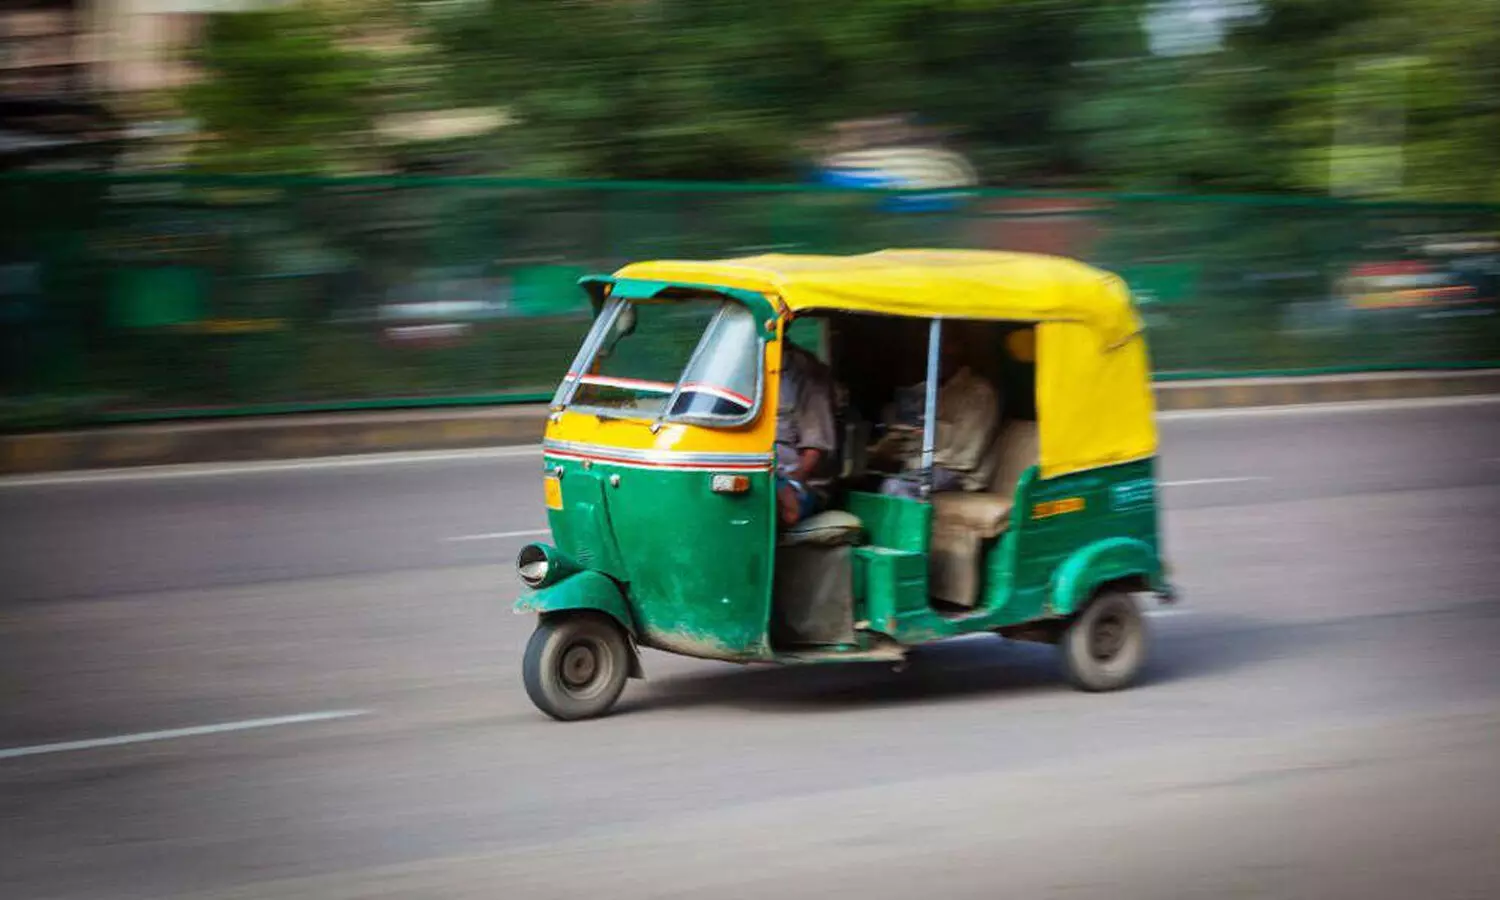 Broken bones better, says Gurgaon woman who jumped out of moving auto; See viral Twitter post